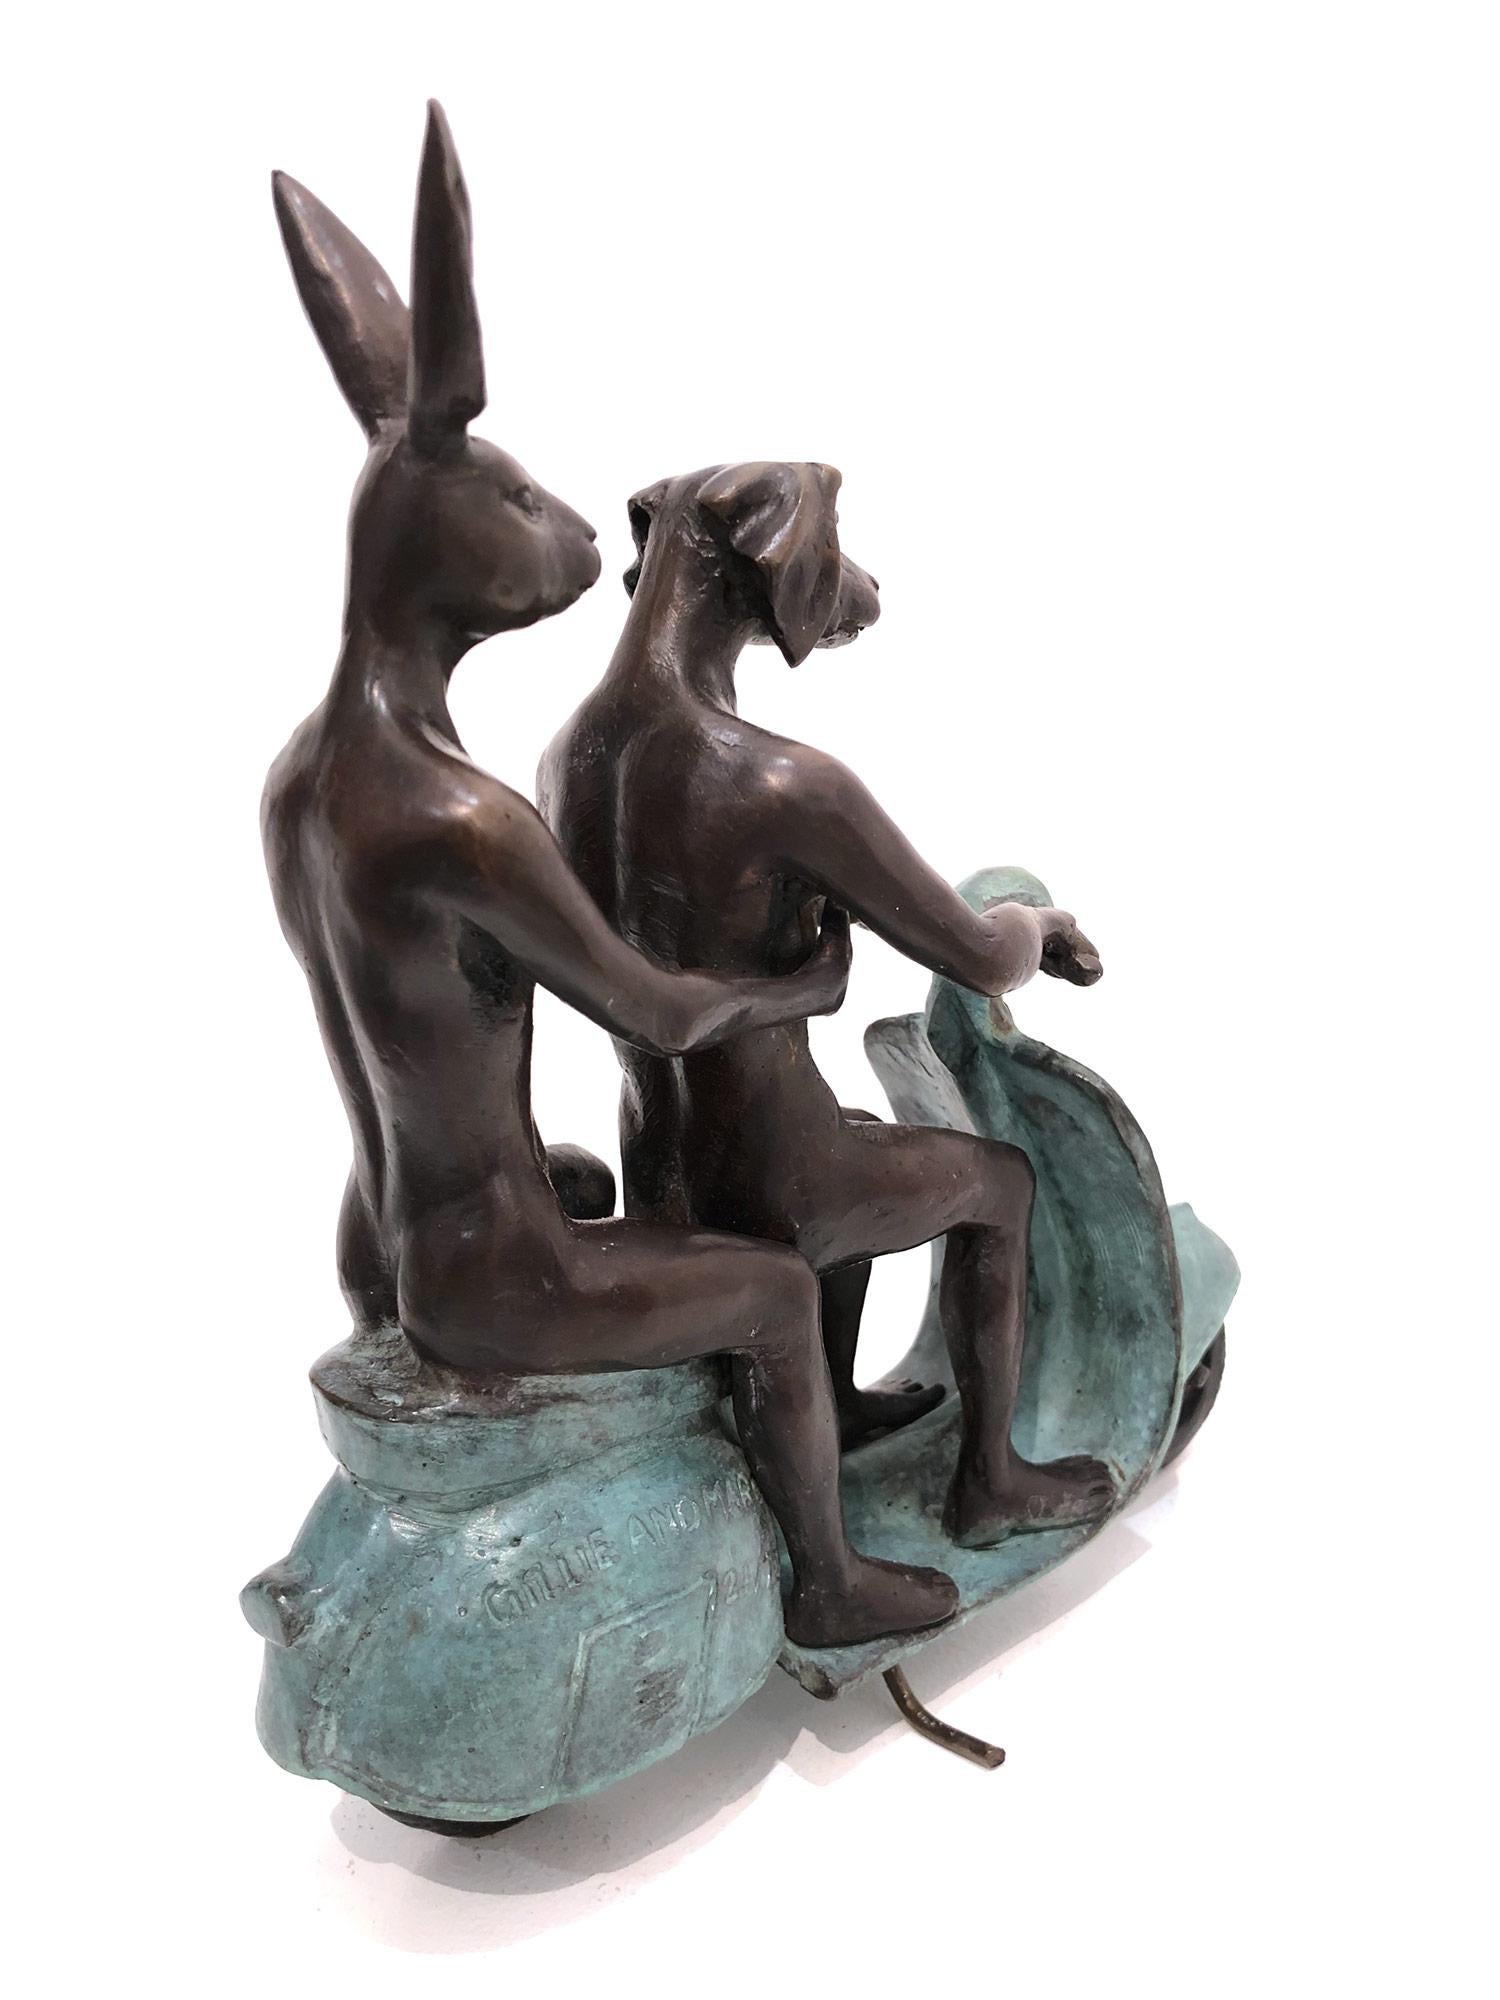 They were the Authentic Vespa Riders in Rome (Bronze with Green Patina) - Pop Art Sculpture by Gillie and Marc Schattner